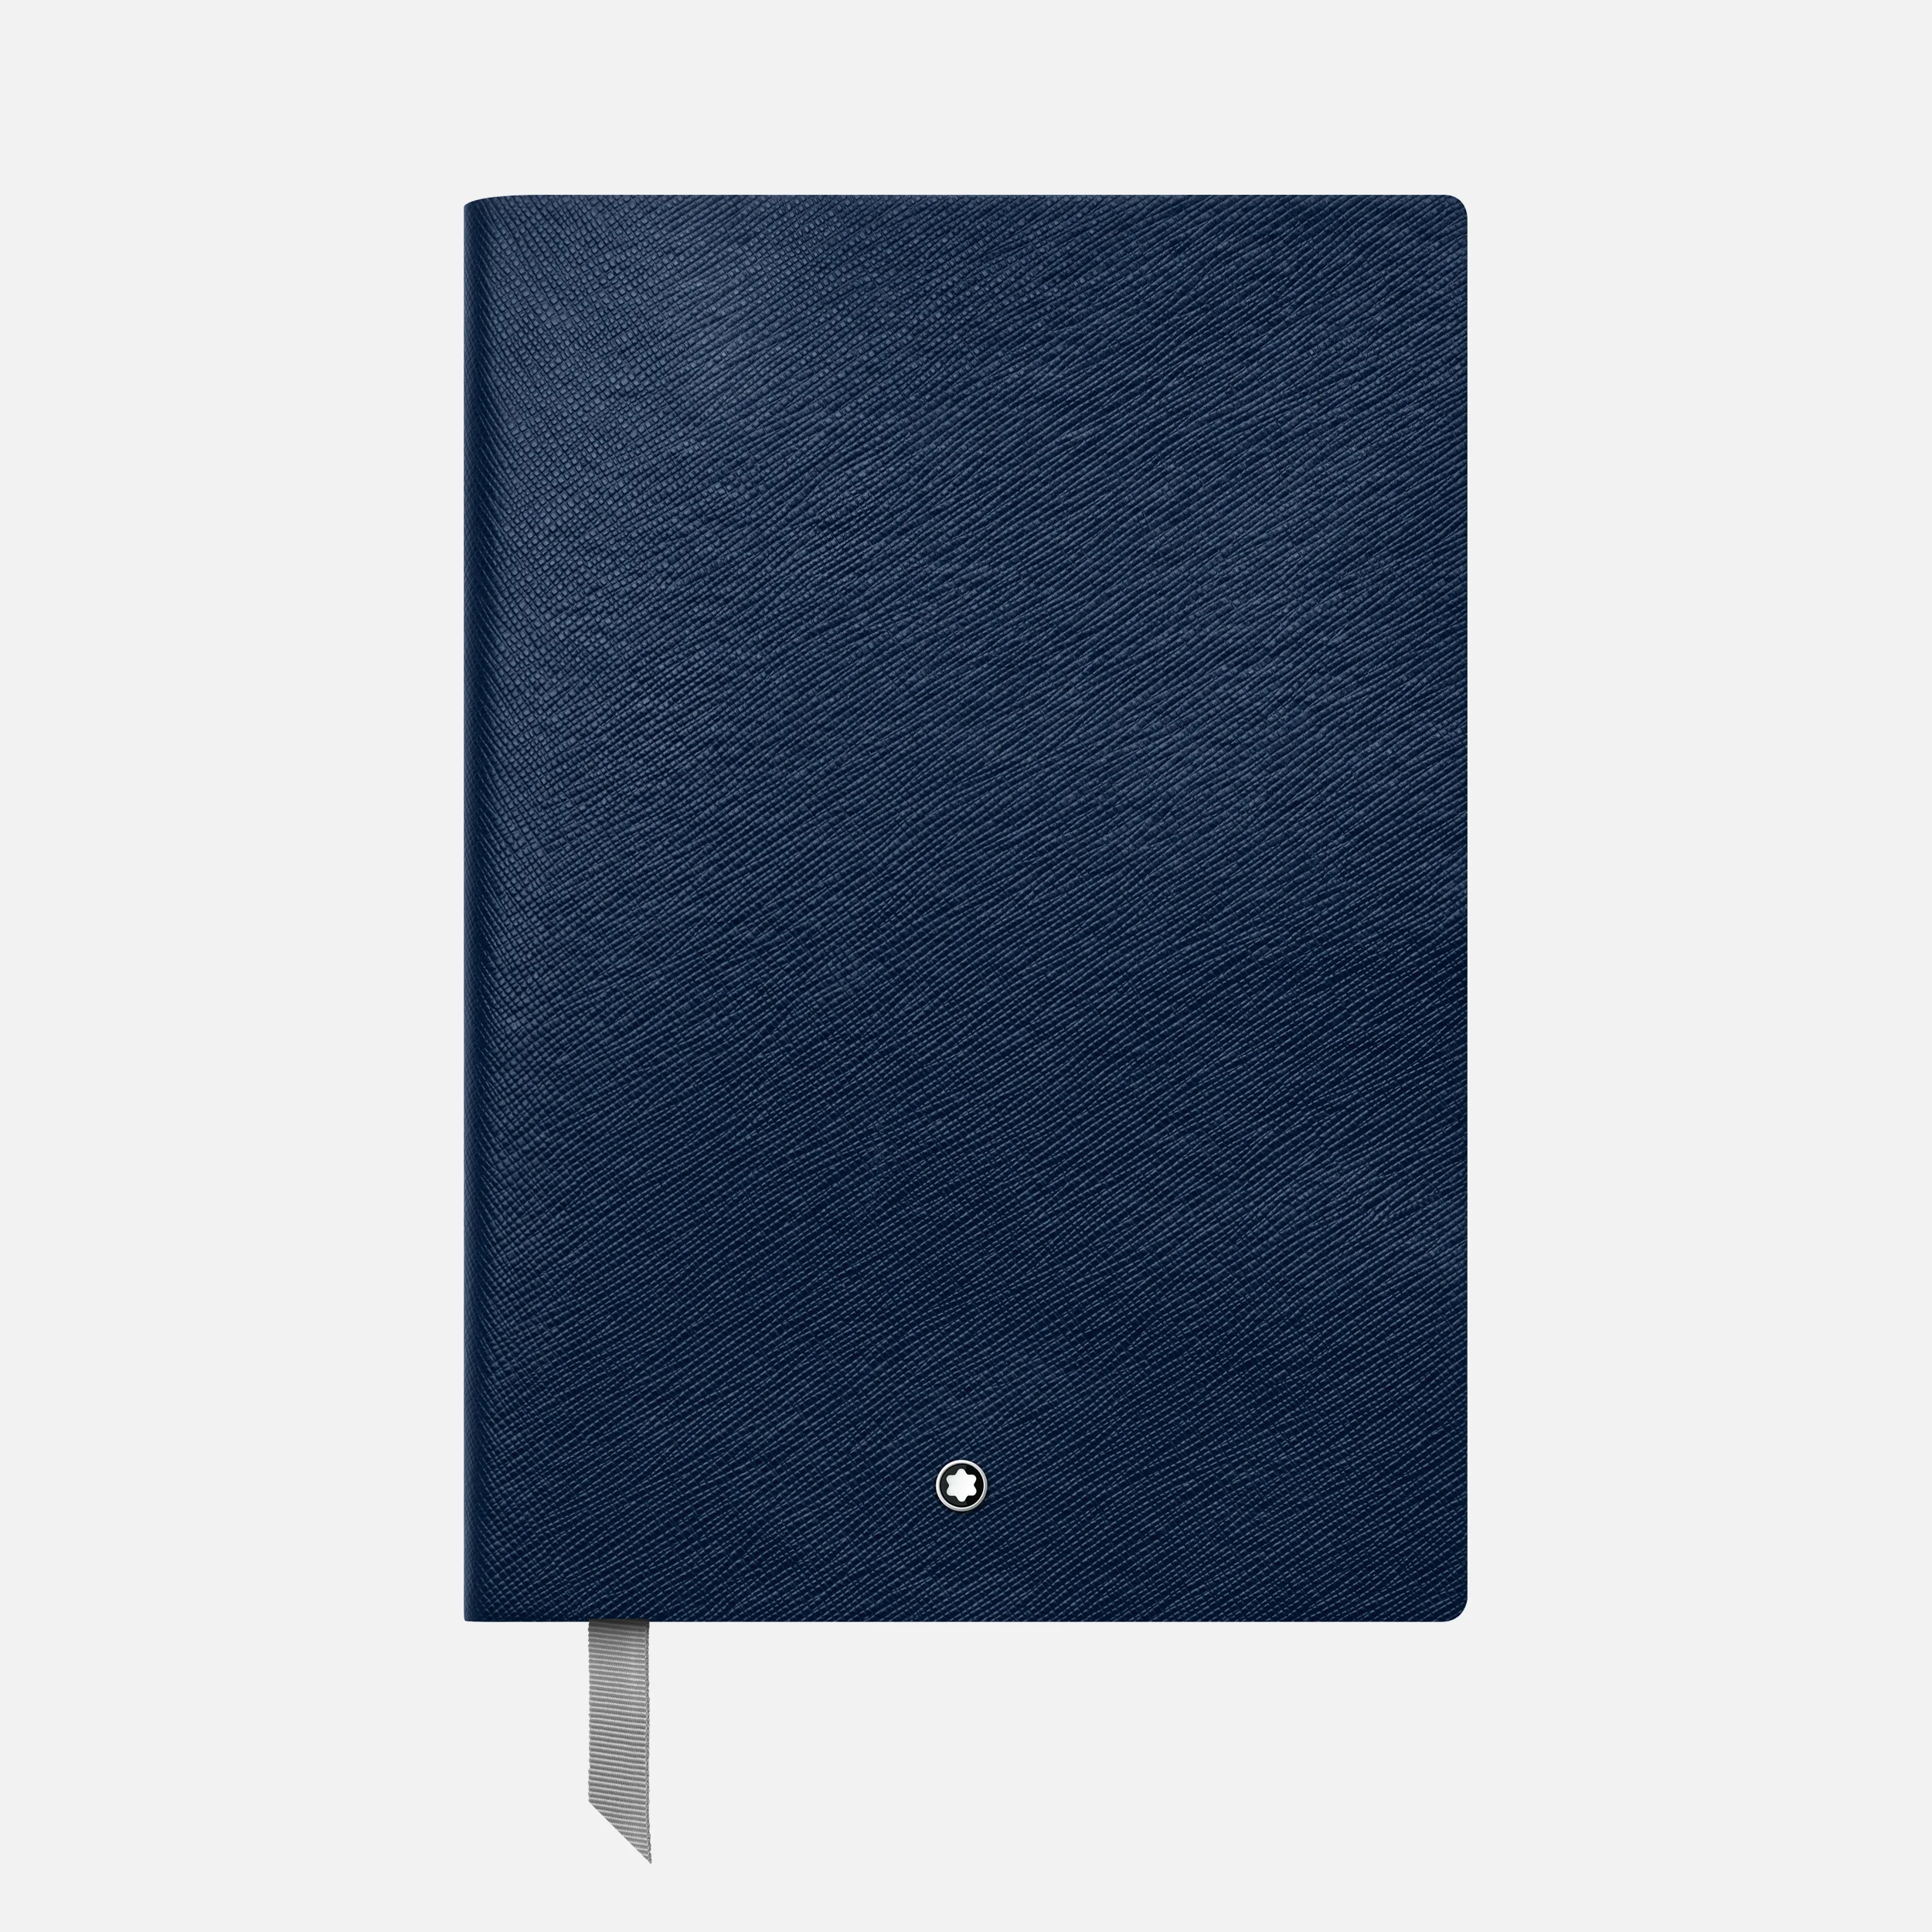 Montblanc Fine Stationery Notebook 146 Indigo Lined - Pencraft the boutique